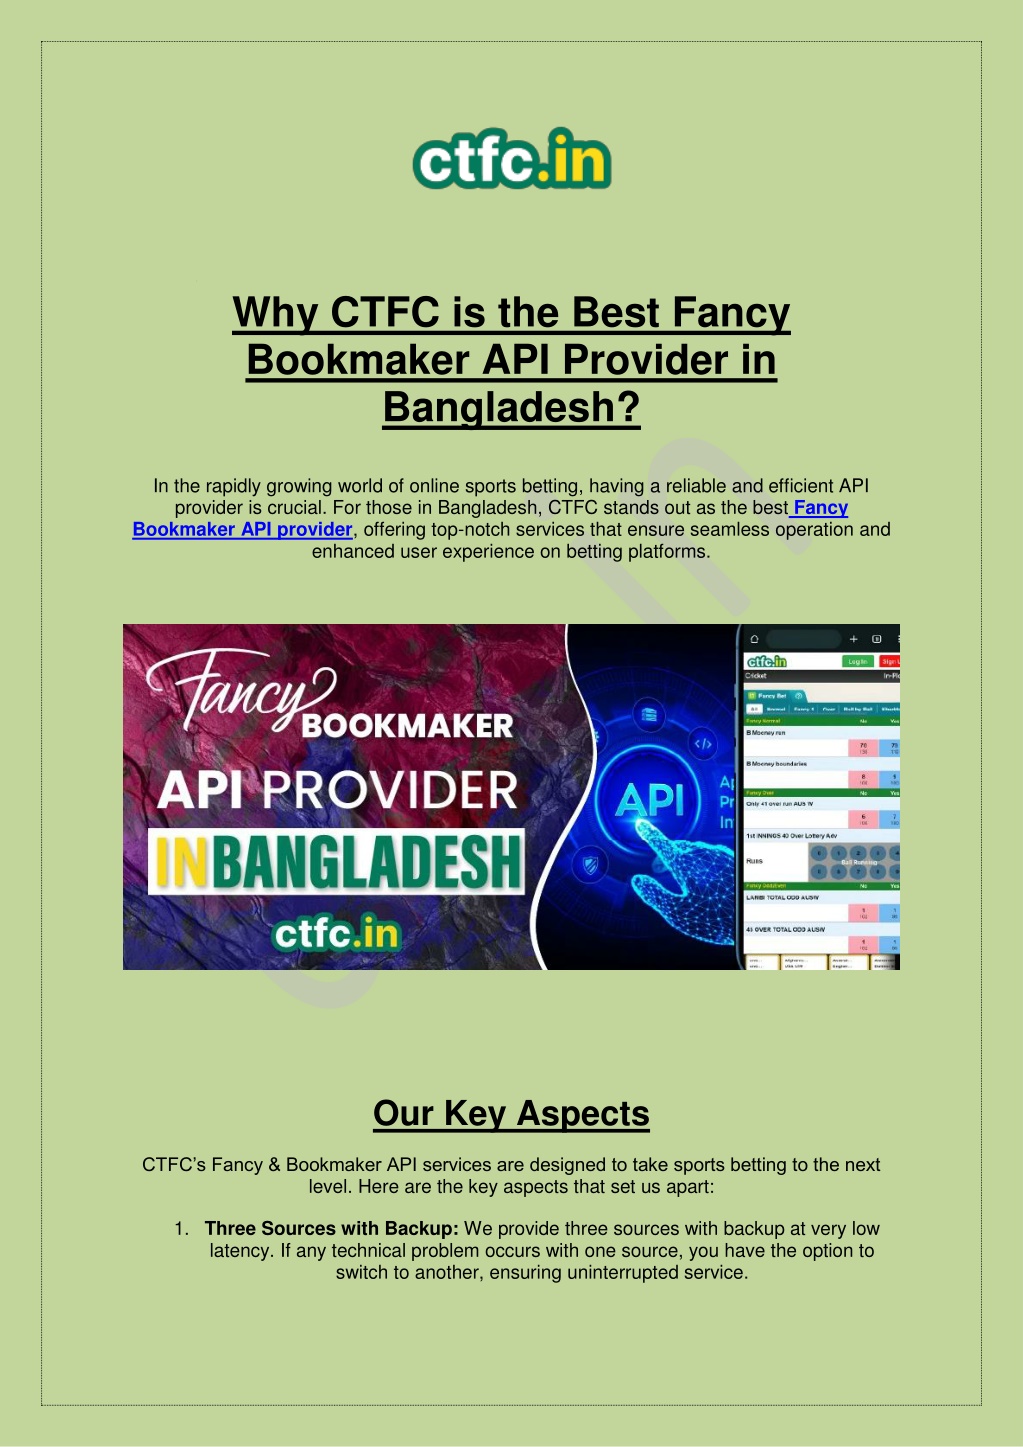 why ctfc is the best fancy bookmaker api provider l.w